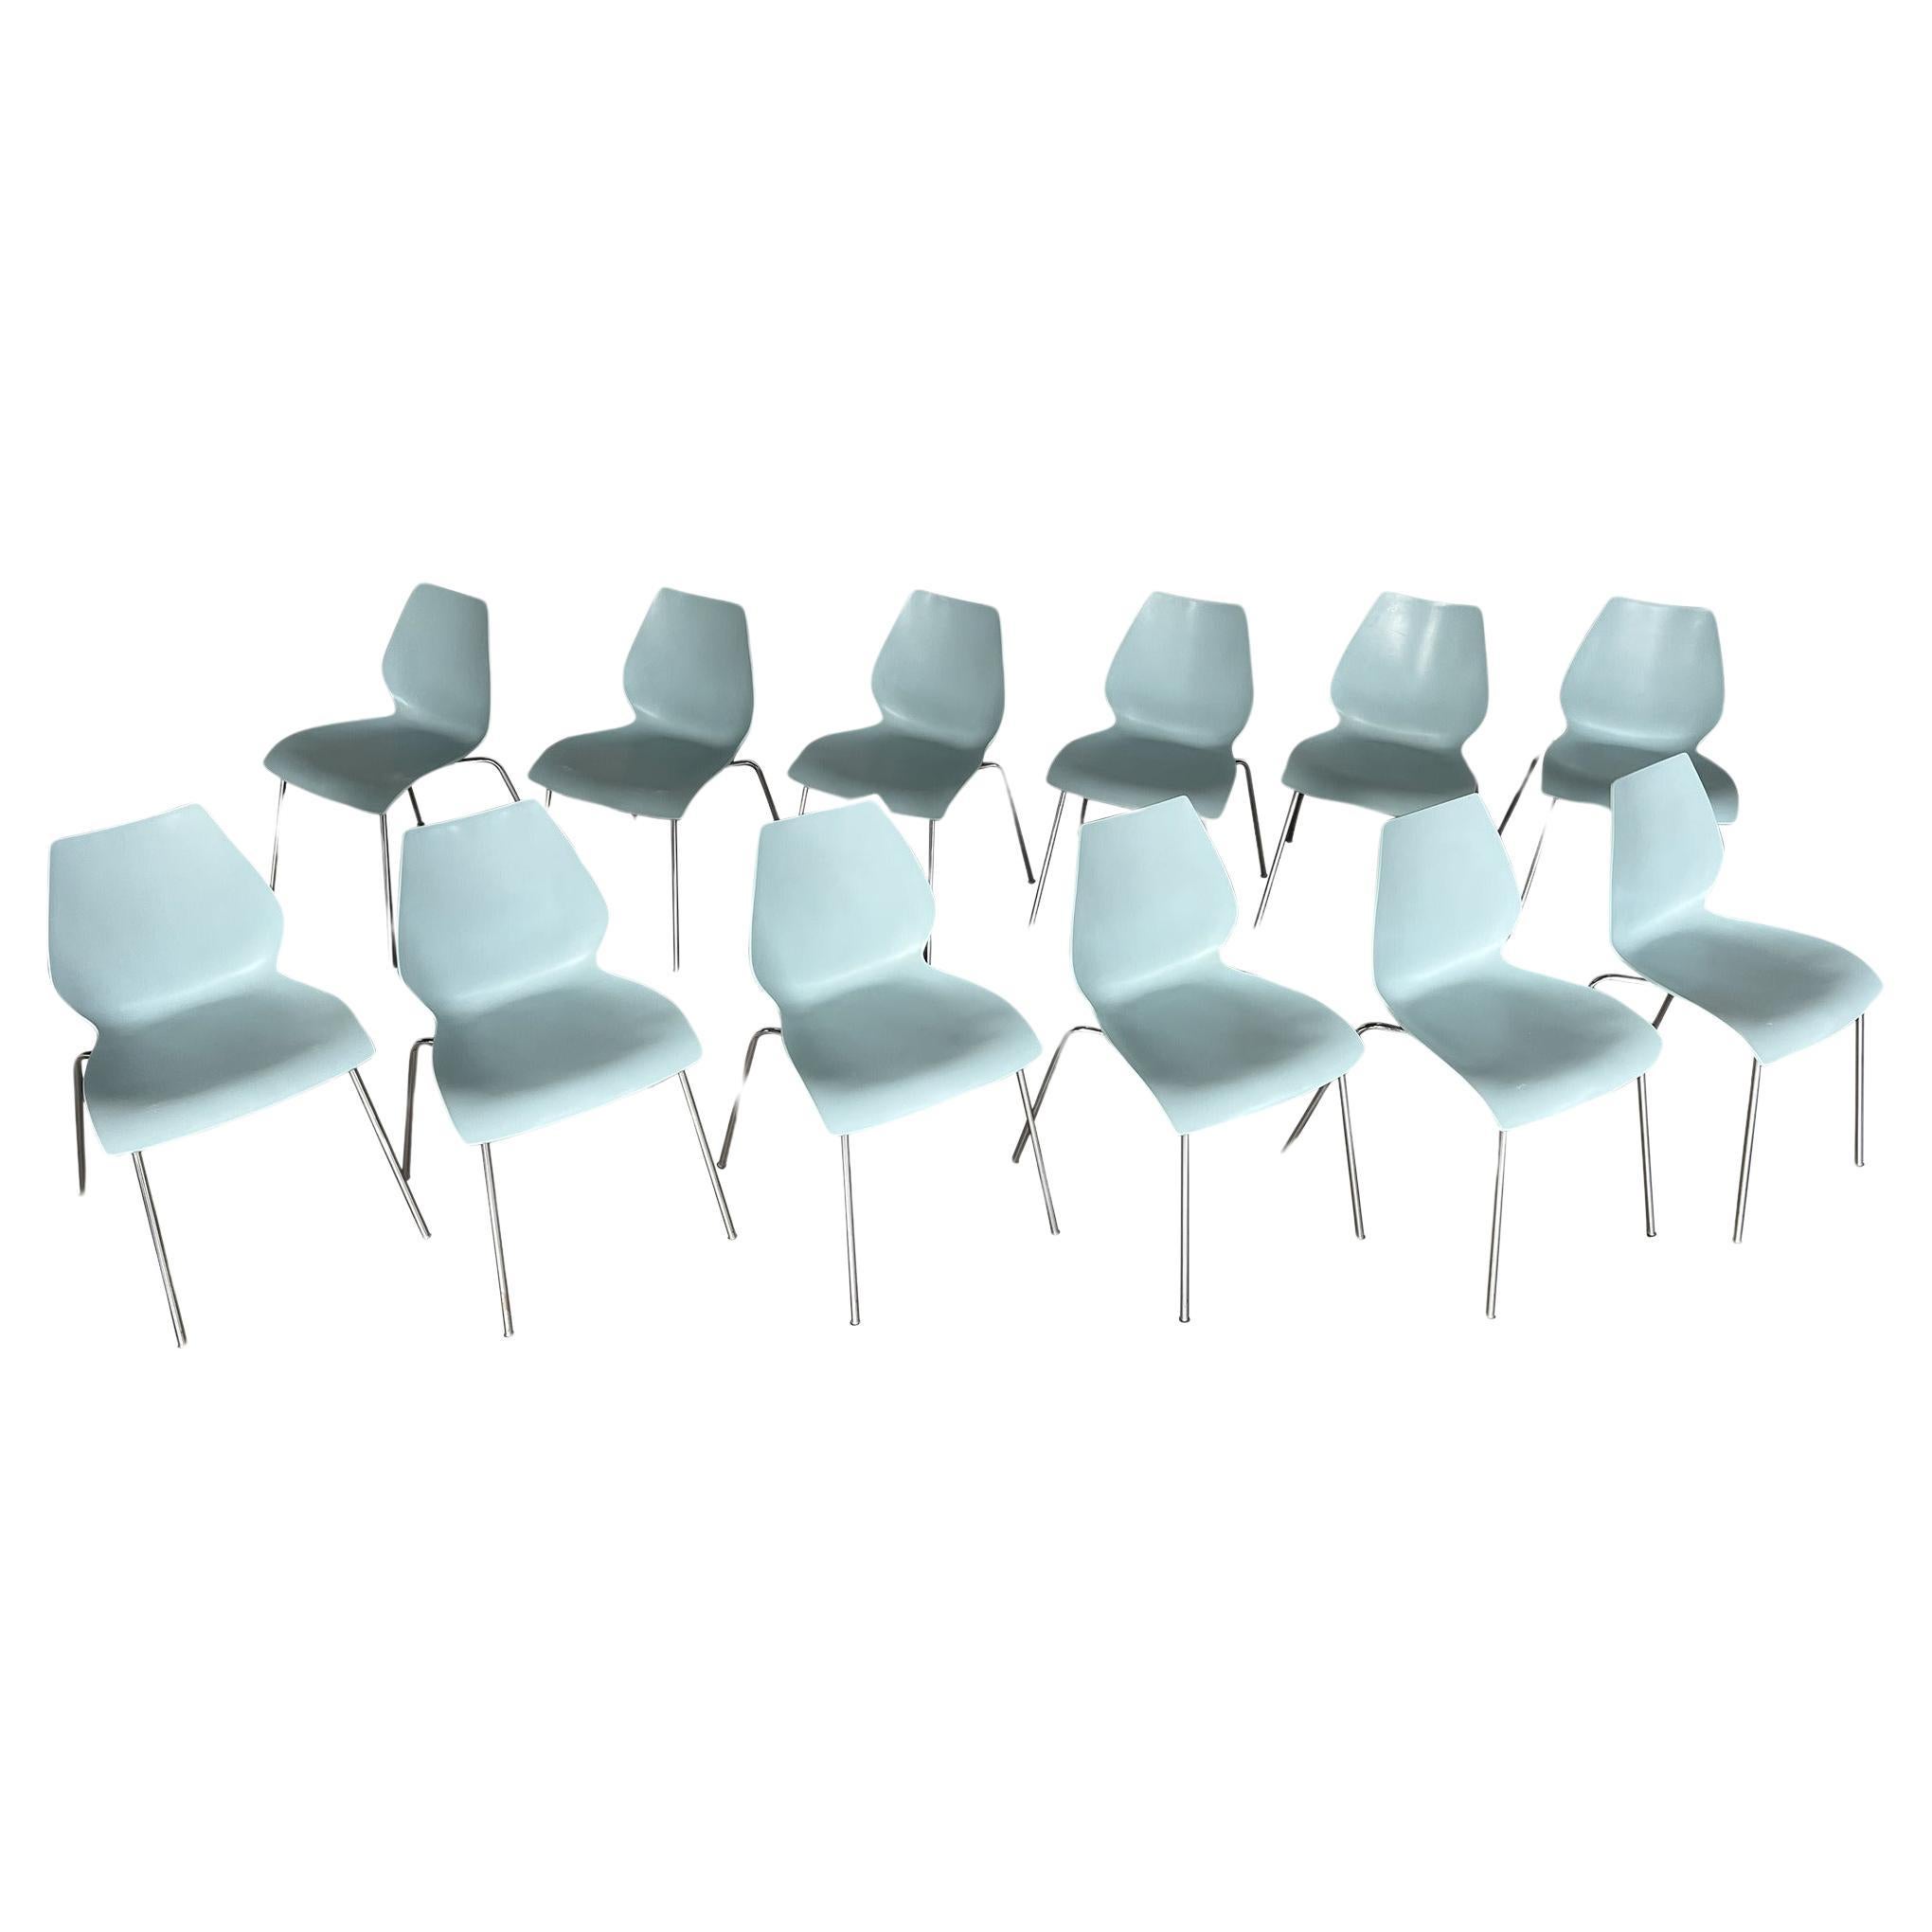 Italian Maui Pale Blue Side Chairs Vico Magistretti for Kartell - Set of 12 For Sale